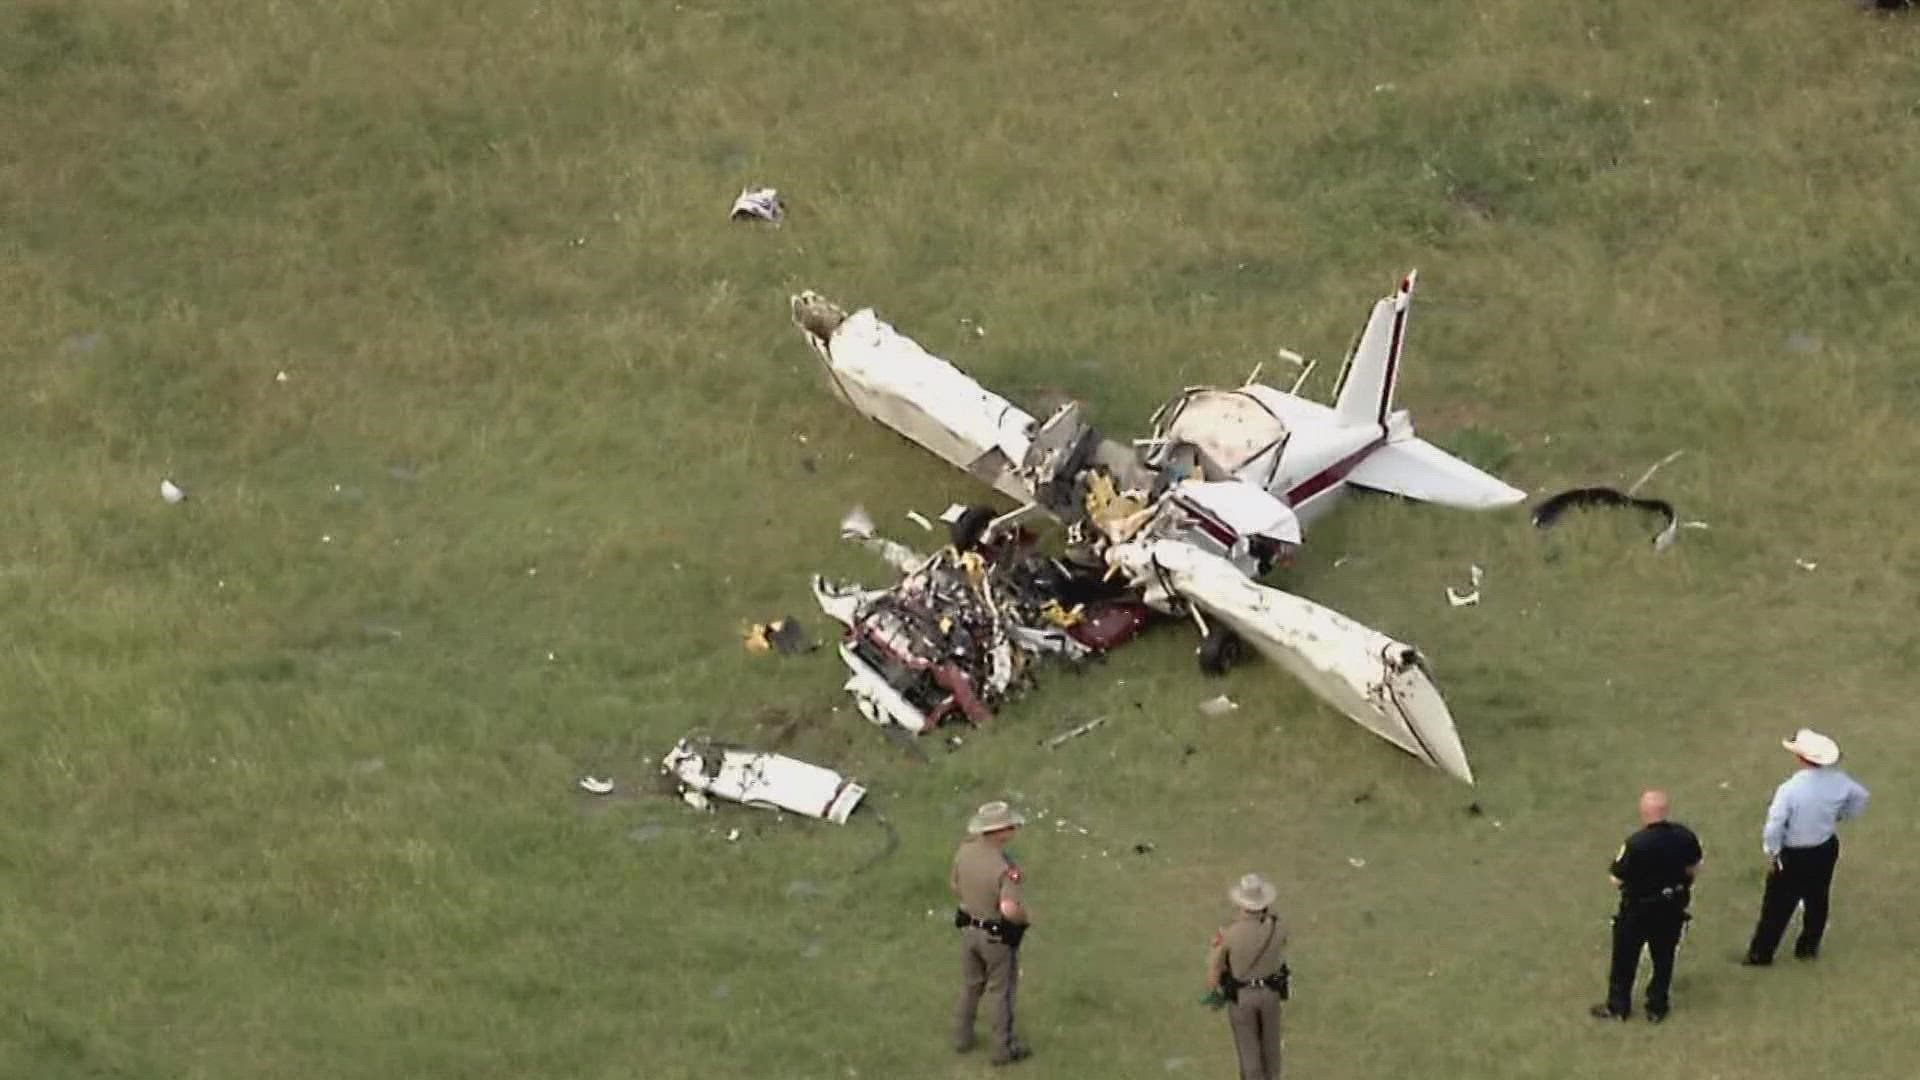 The plane crashed Tuesday evening in Cleburne south of Fort Worth.